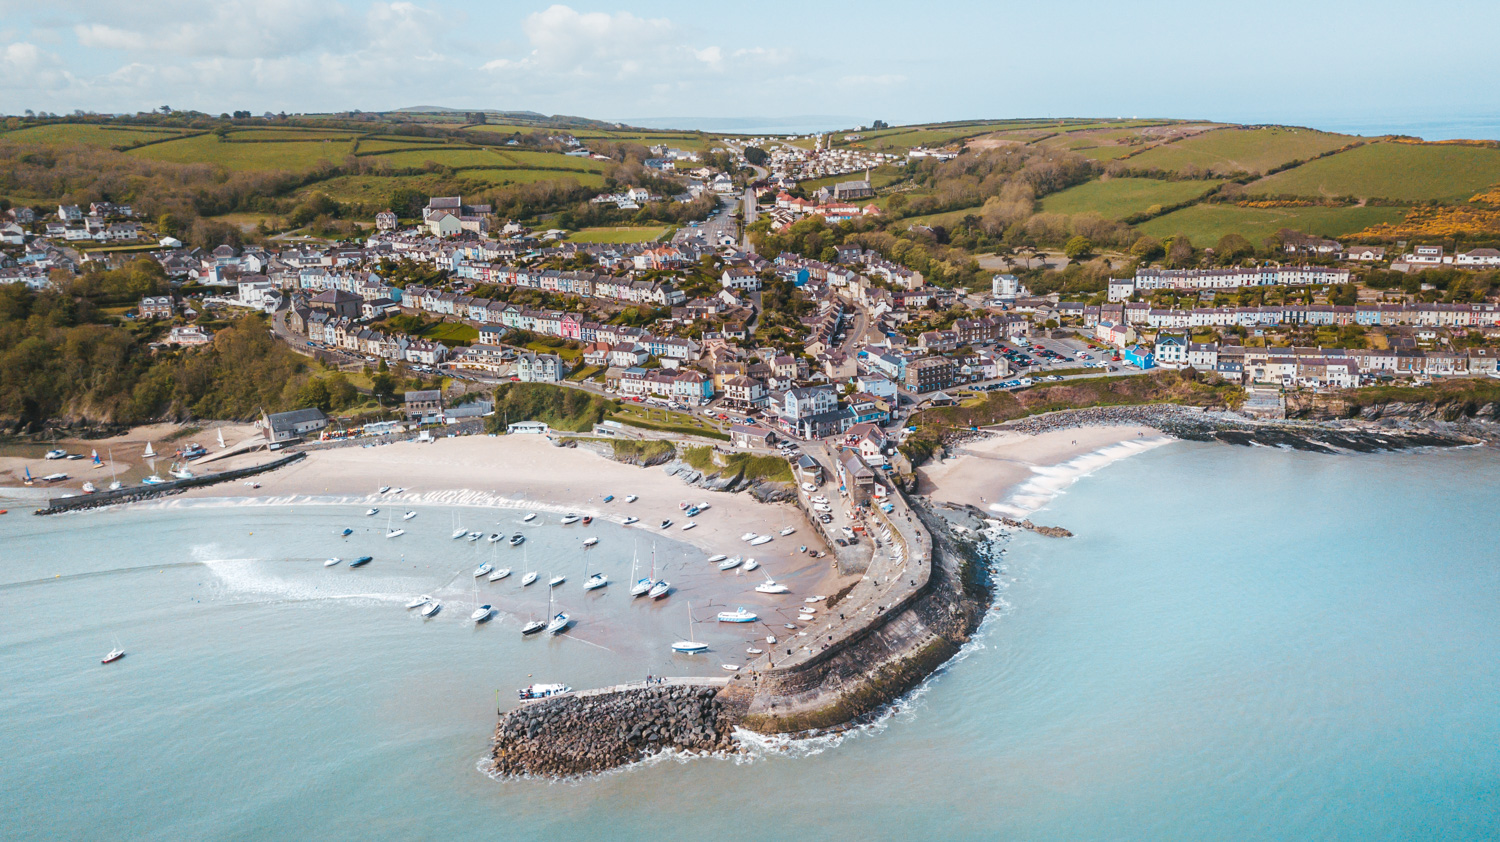 New Quay from above by drone // The Most Beautiful Places to Visit in Wales // #readysetjetset #wales #uk #welsh #travel #photospots #blogpost